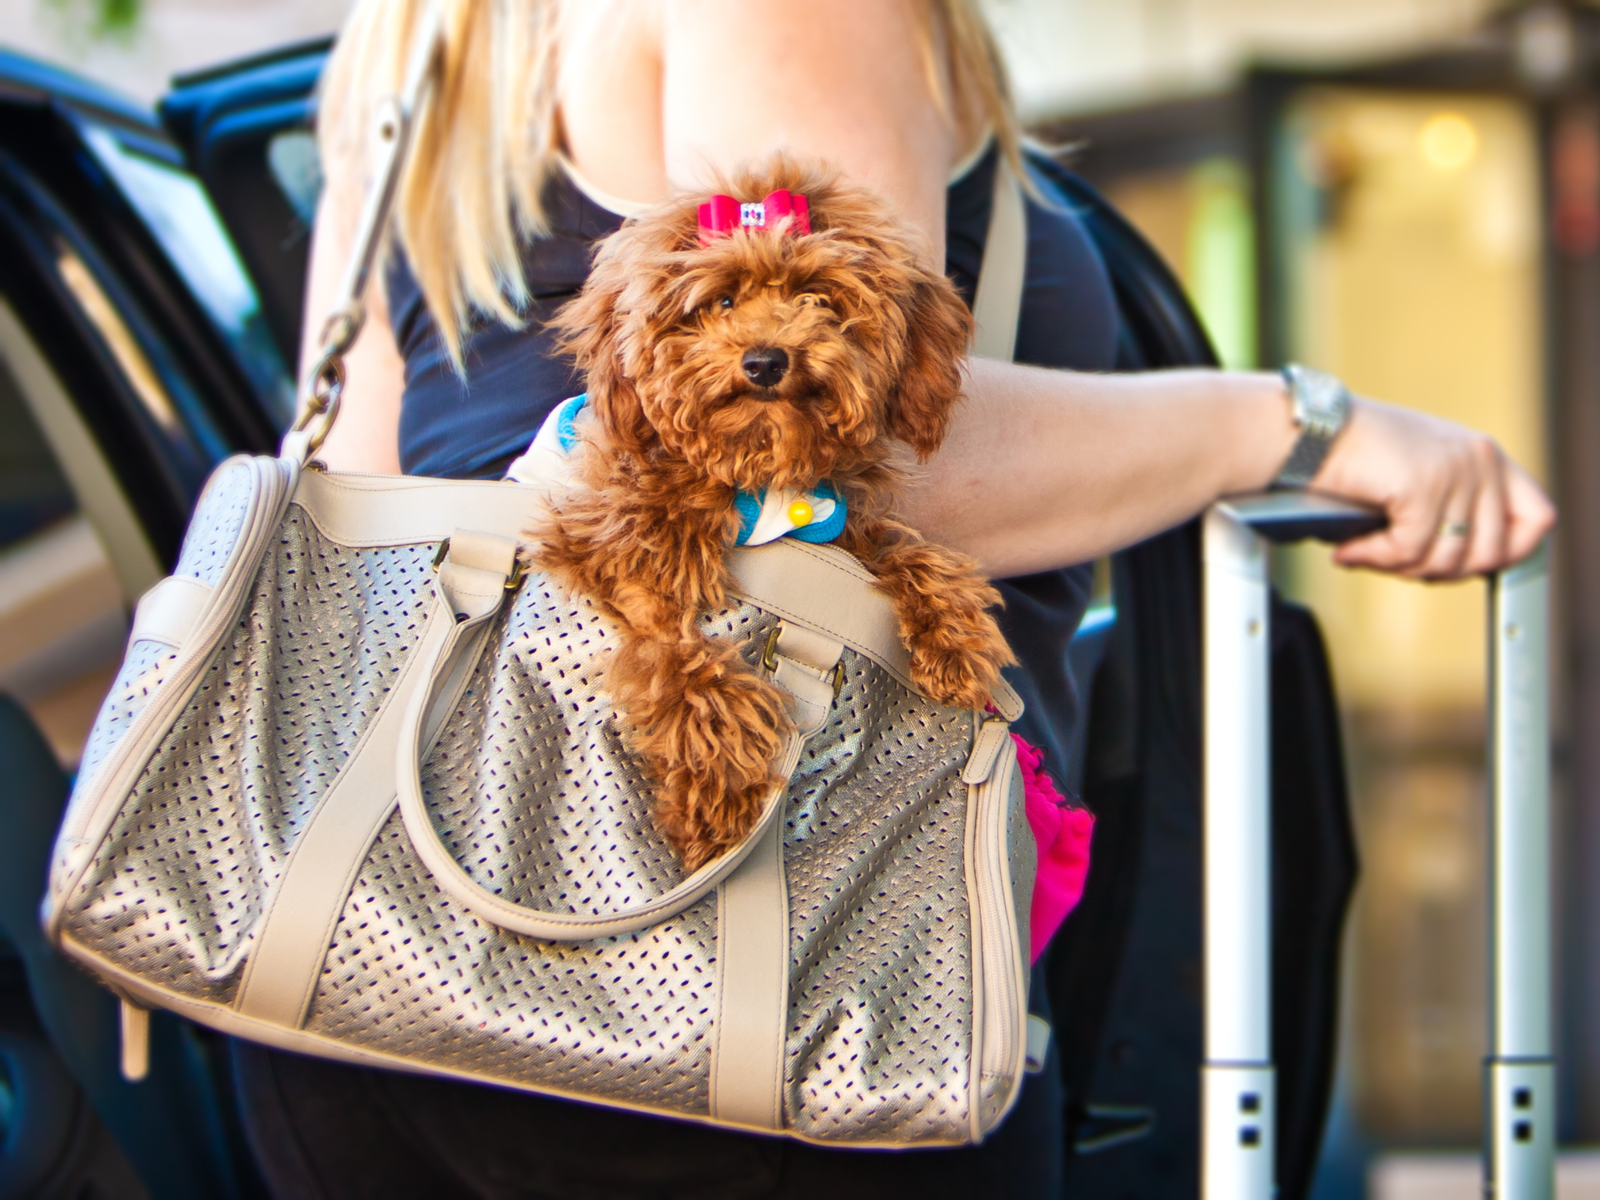 Small brown dog sitting in one of the best travel dog bags with a bow in her hair